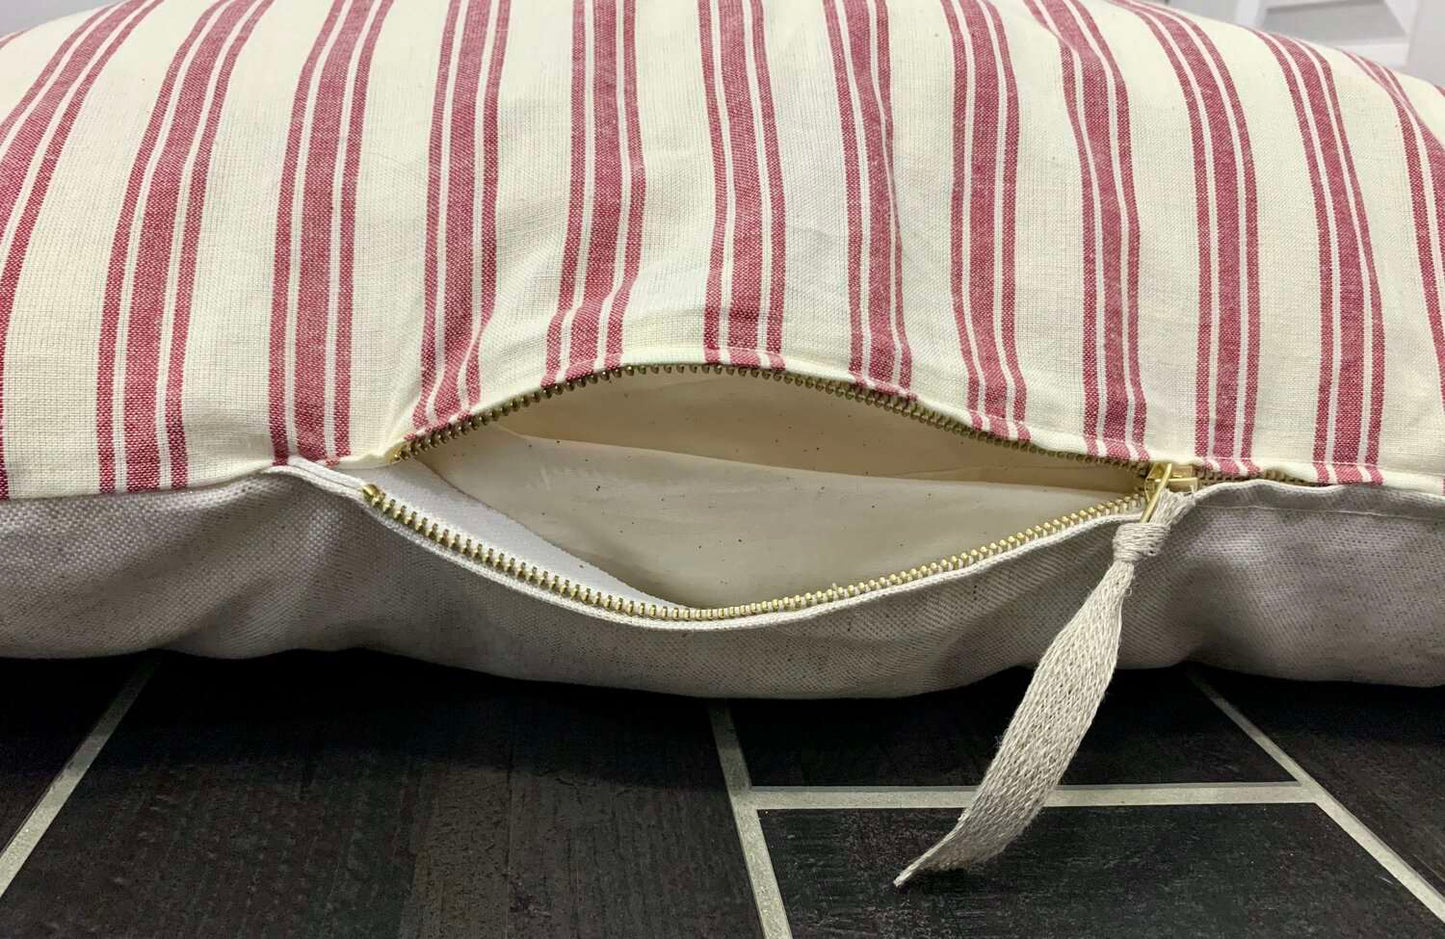 Marblehead Light Red Ticking Stripe Farmhouse Duvet Style Dog Bed--detail view of zipper